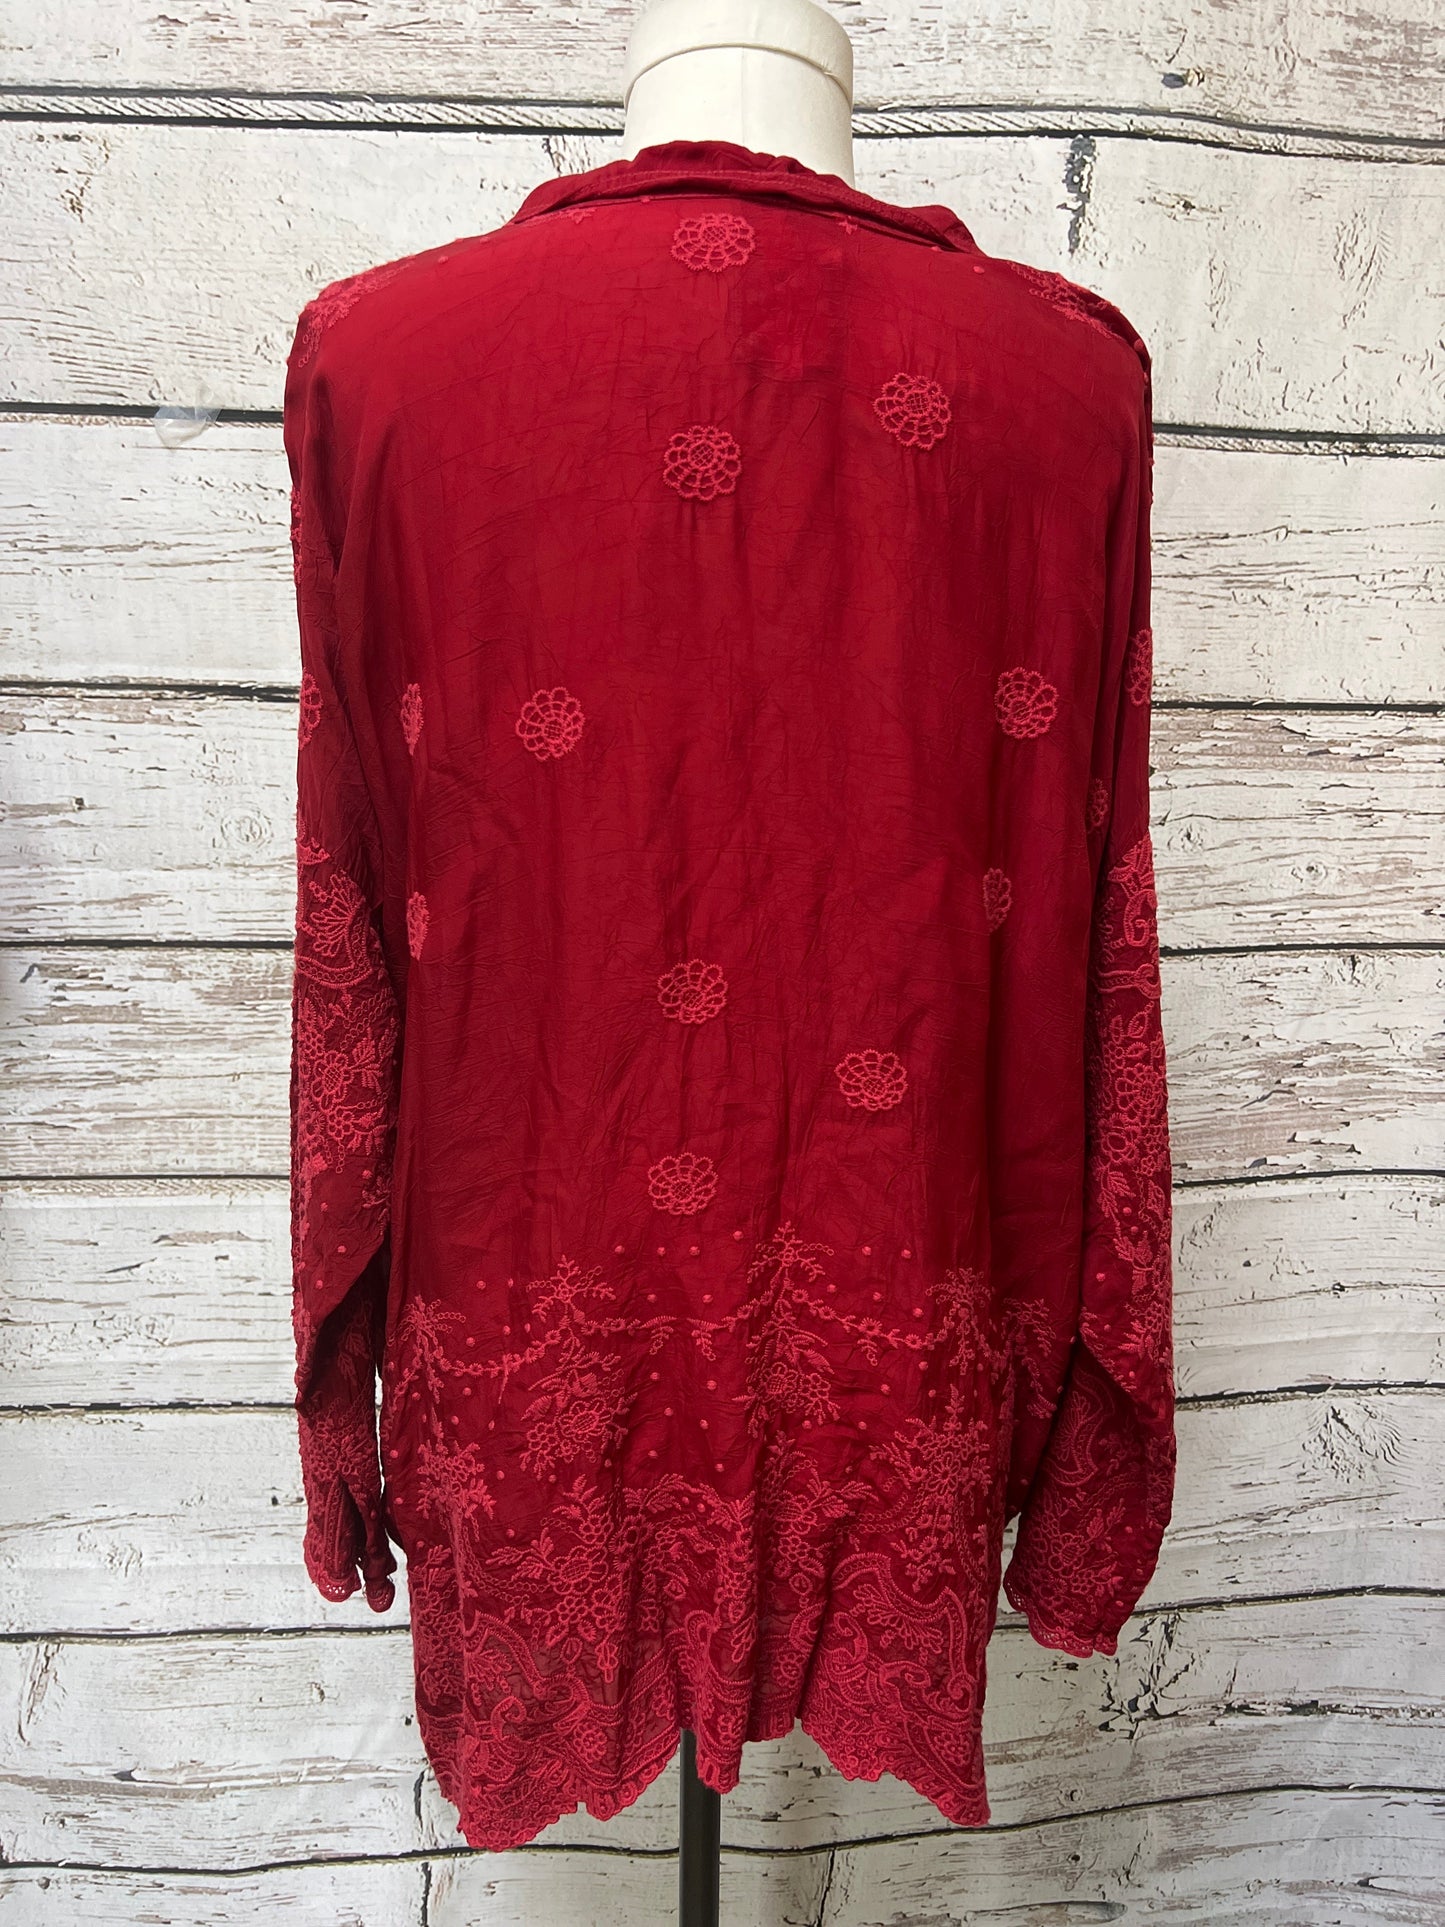 Red Blouse Long Sleeve Johnny Was, Size 2x